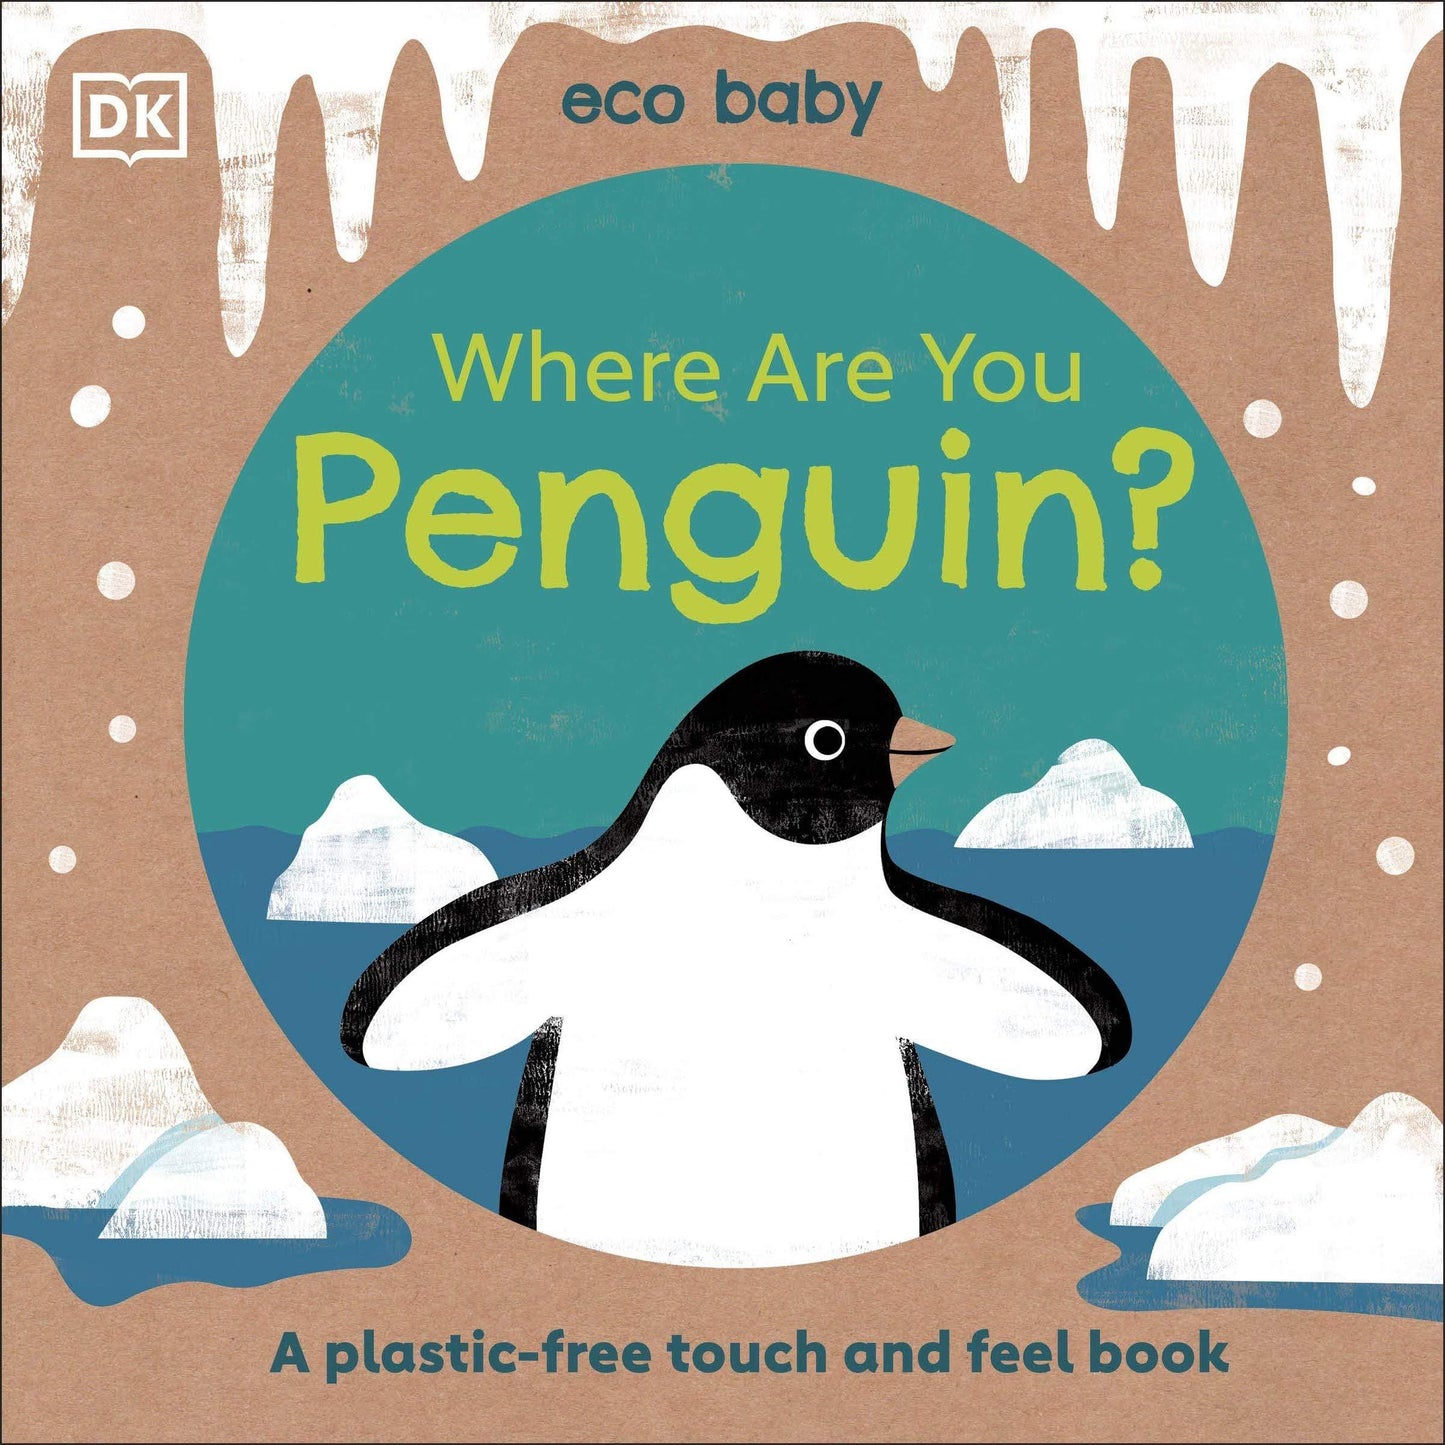 Our Bookshelf Print Books Eco Baby Where Are You Penguin? : A Plastic-free Touch and Feel Book